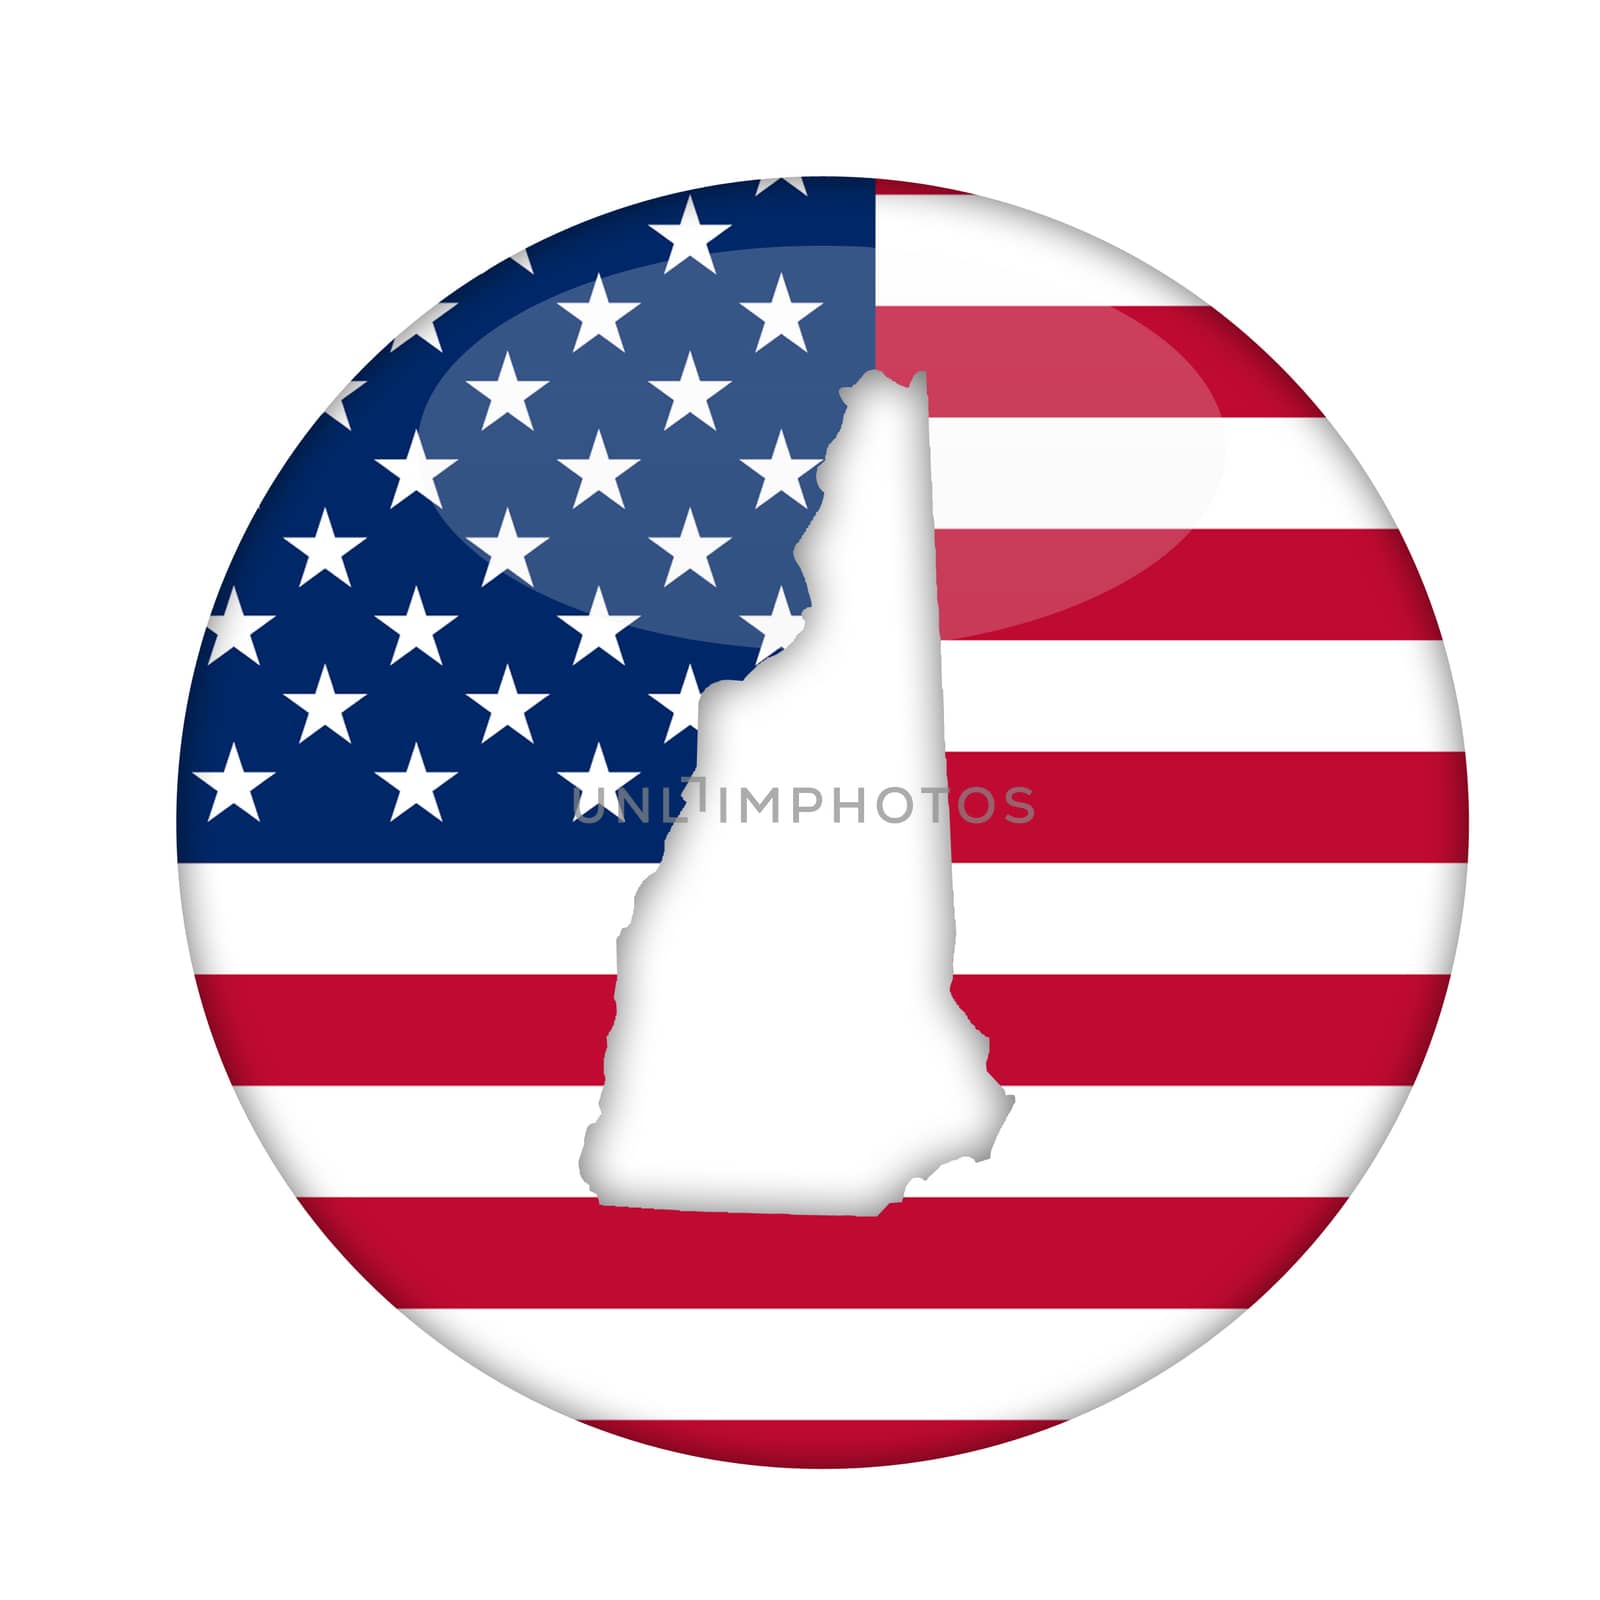 New Hampshire state of America badge isolated on a white background.